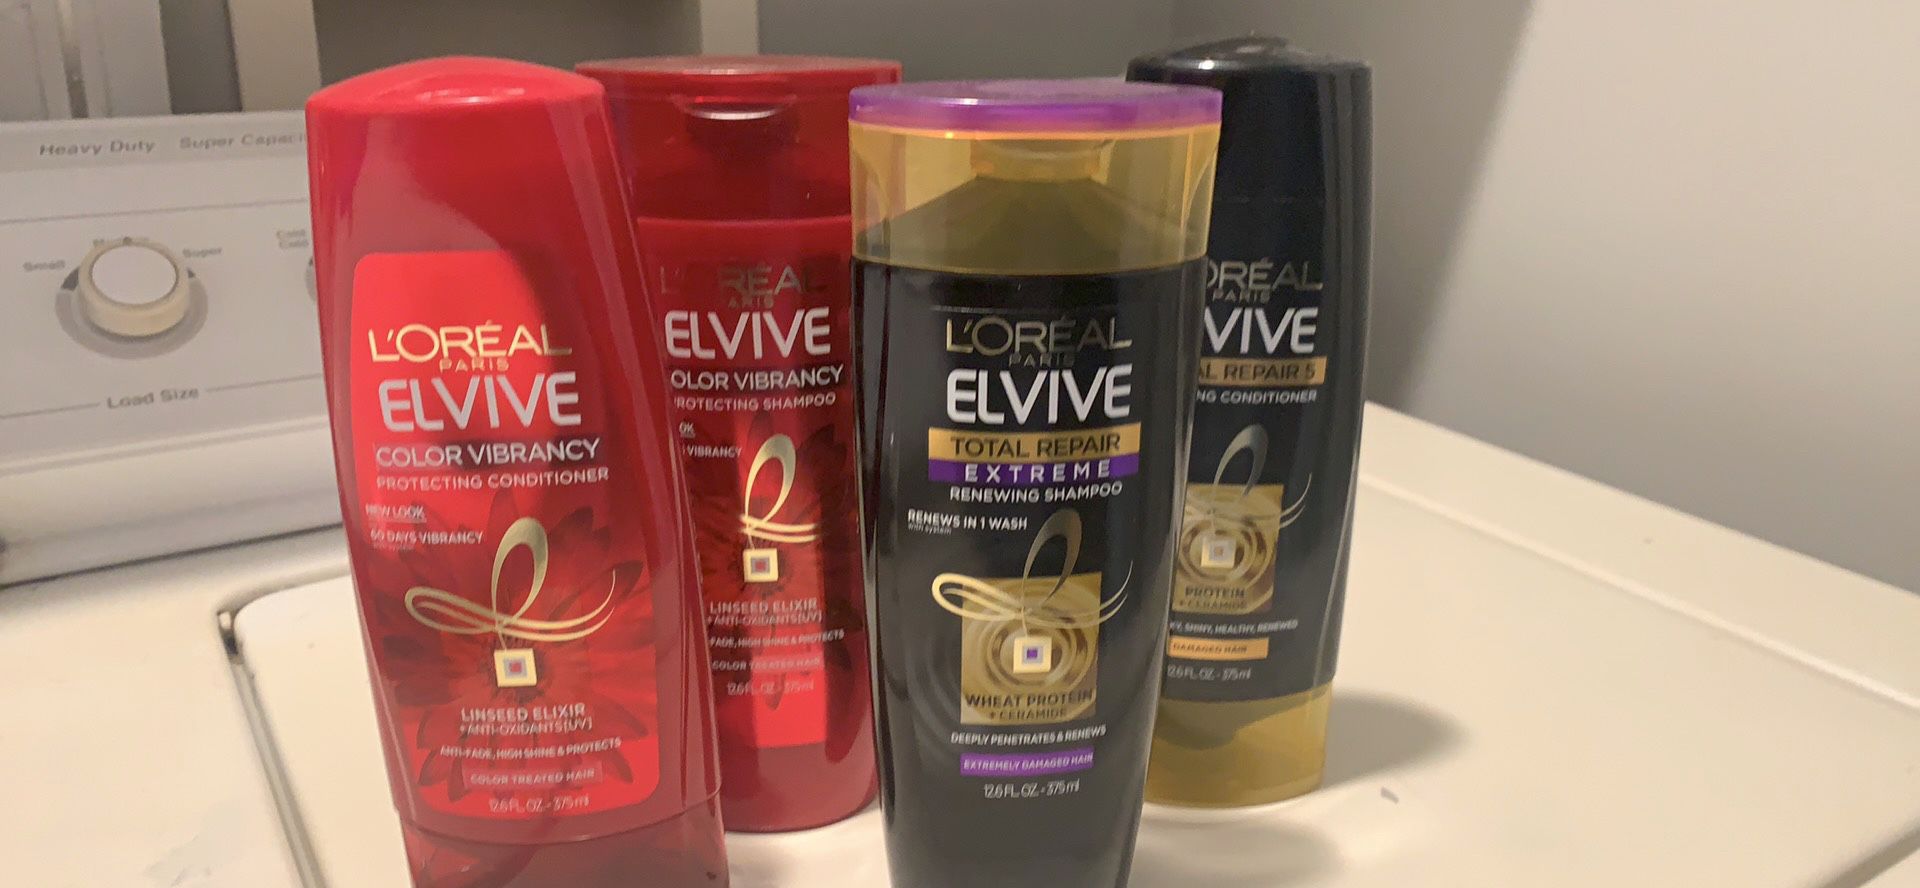 L’ORÉAL Elvive shampoo and conditioner